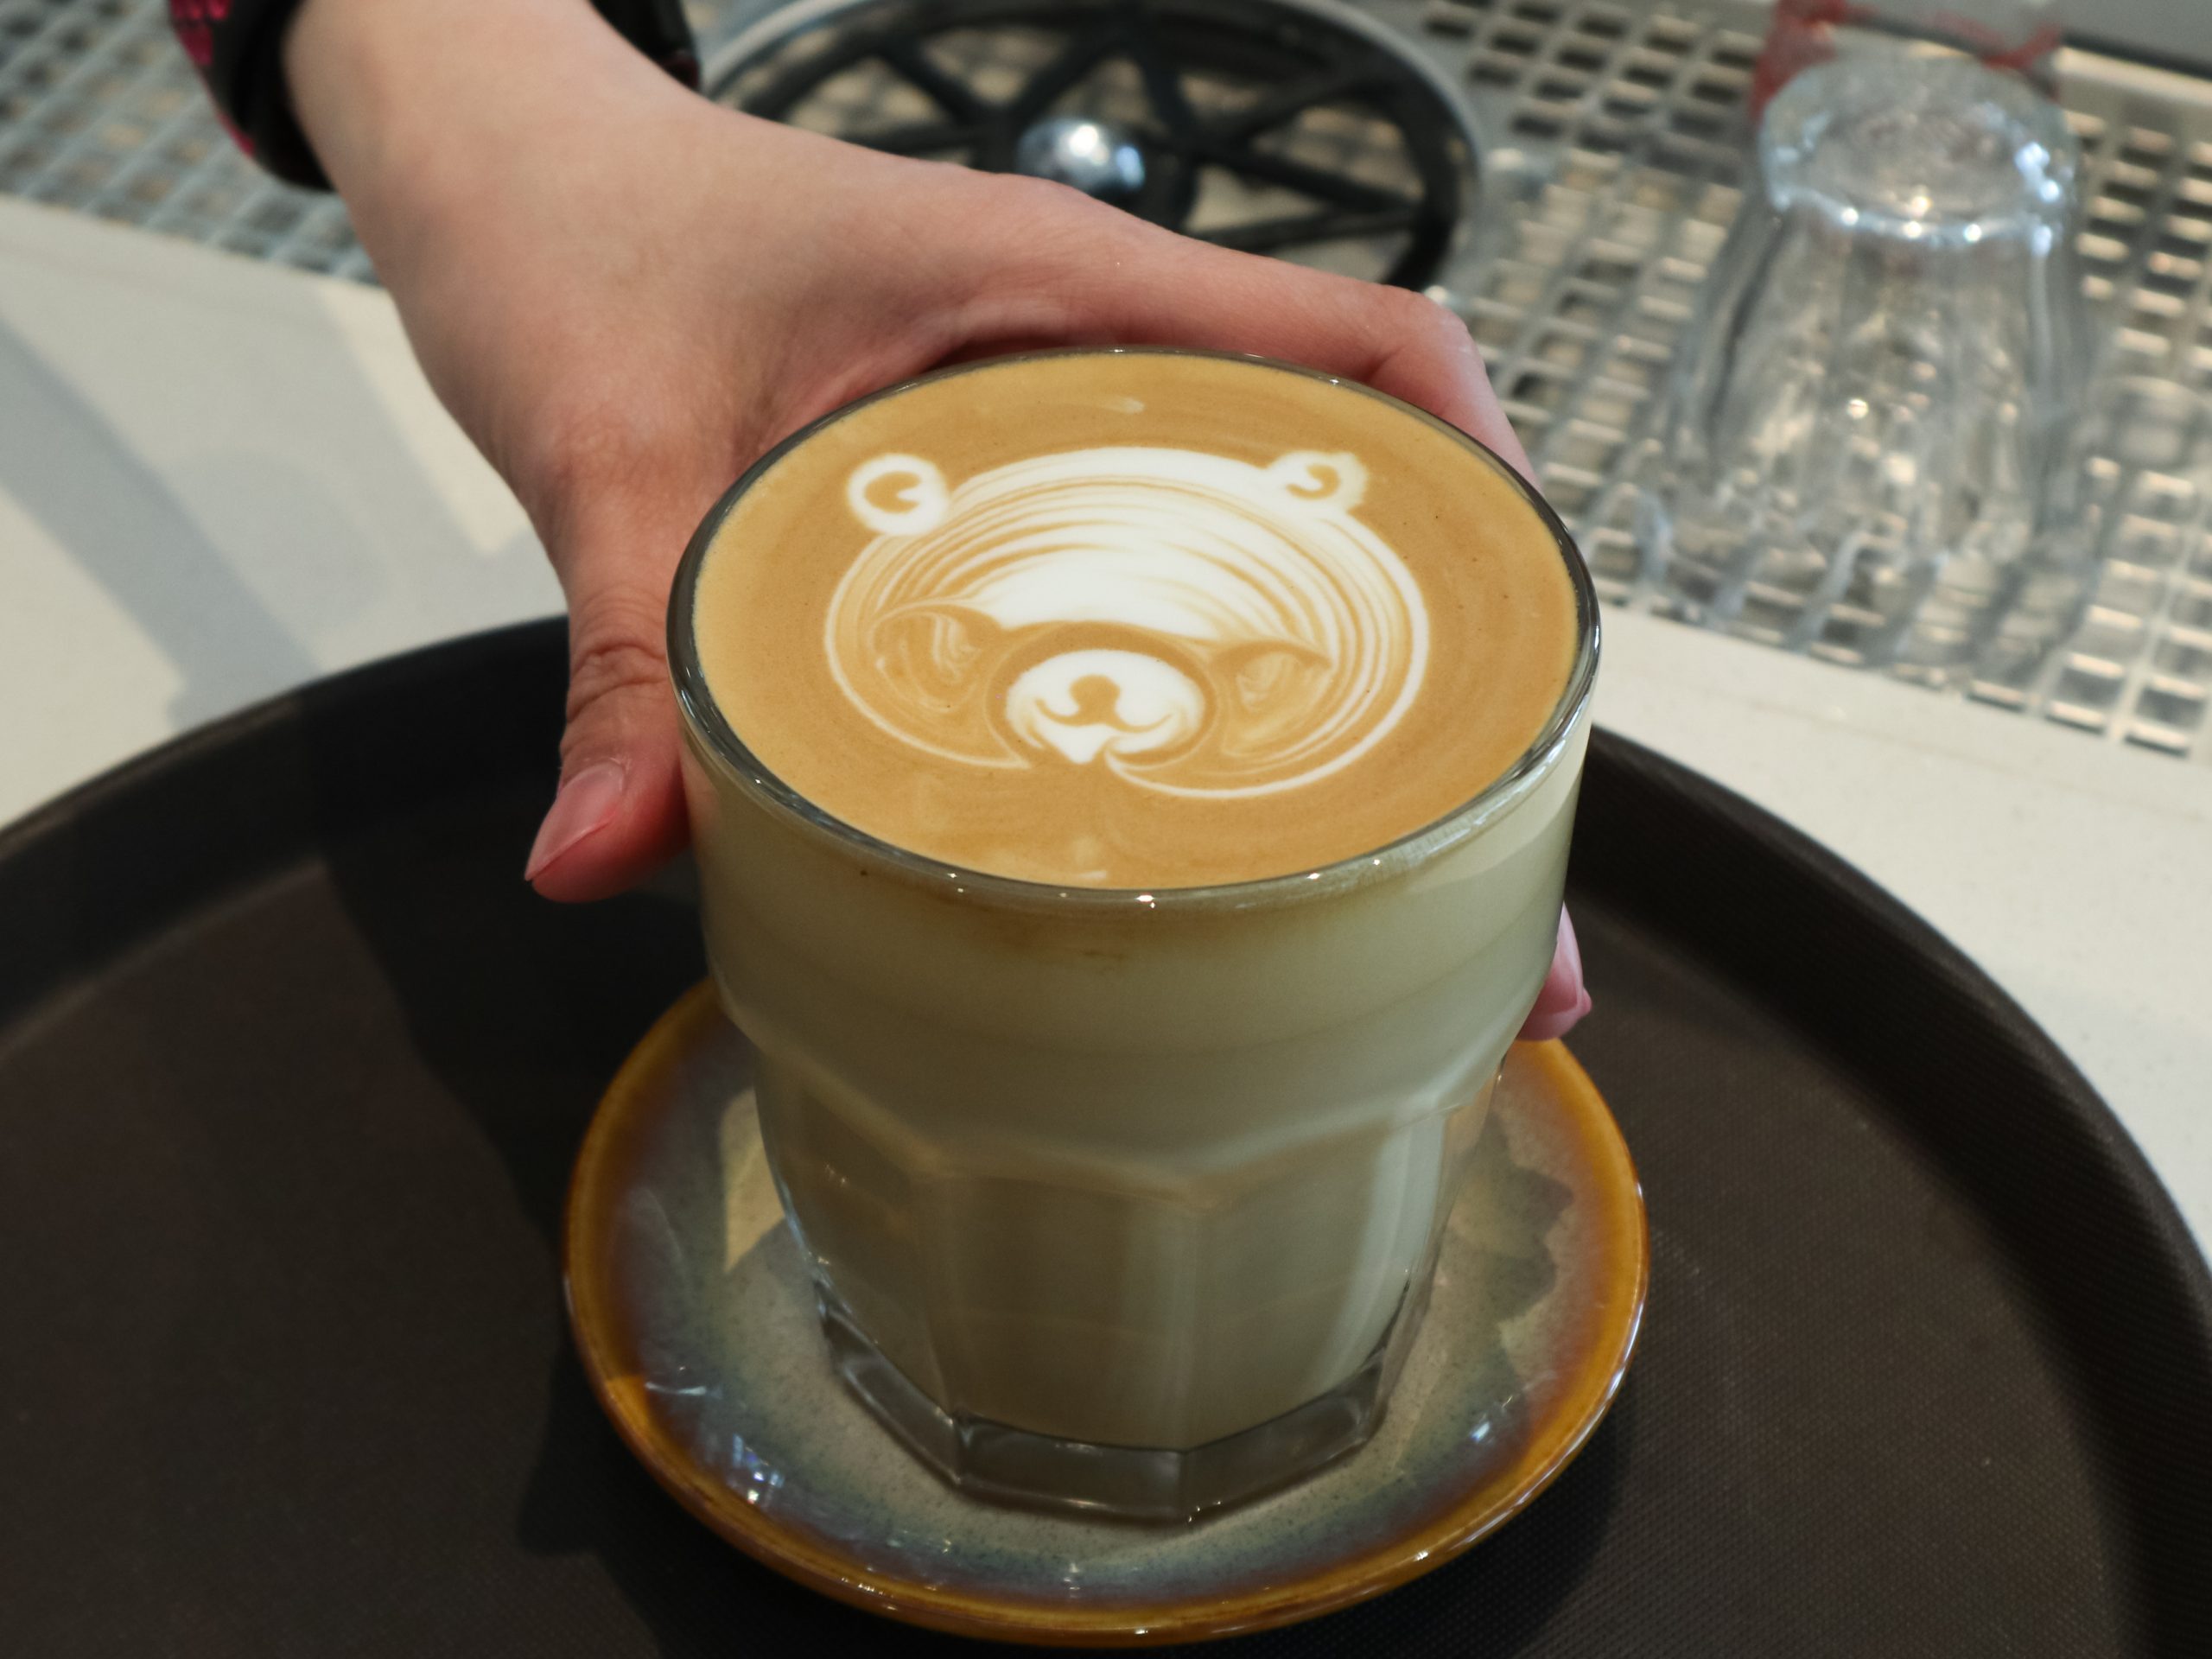 claire_three-new-cafes-tanjong-pagar-huggs-maxwell-collective-5-bear-art-latte